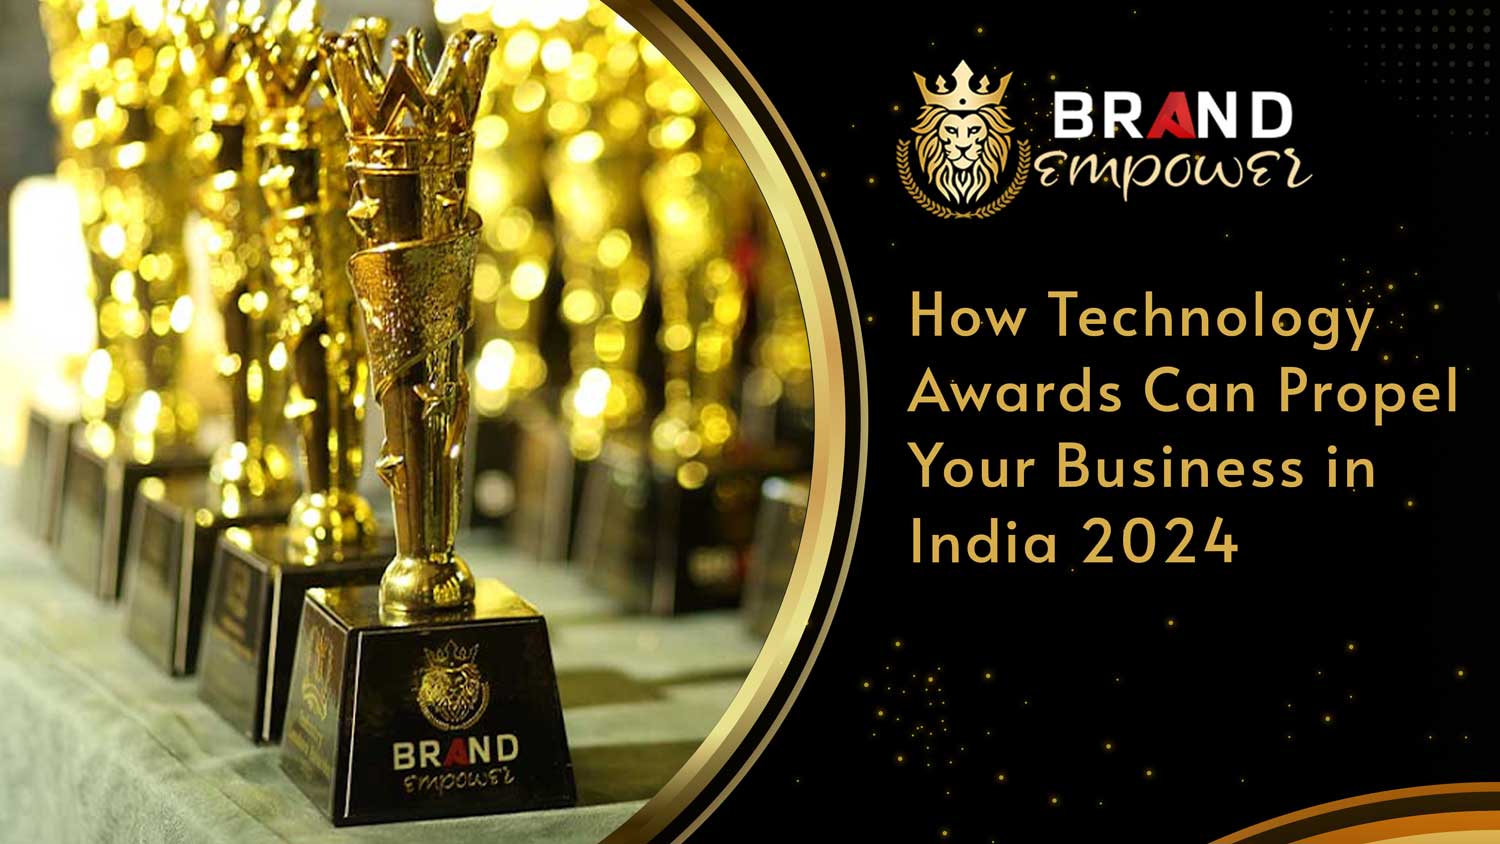 How Technology Awards Can Propel Your Business in India 2024